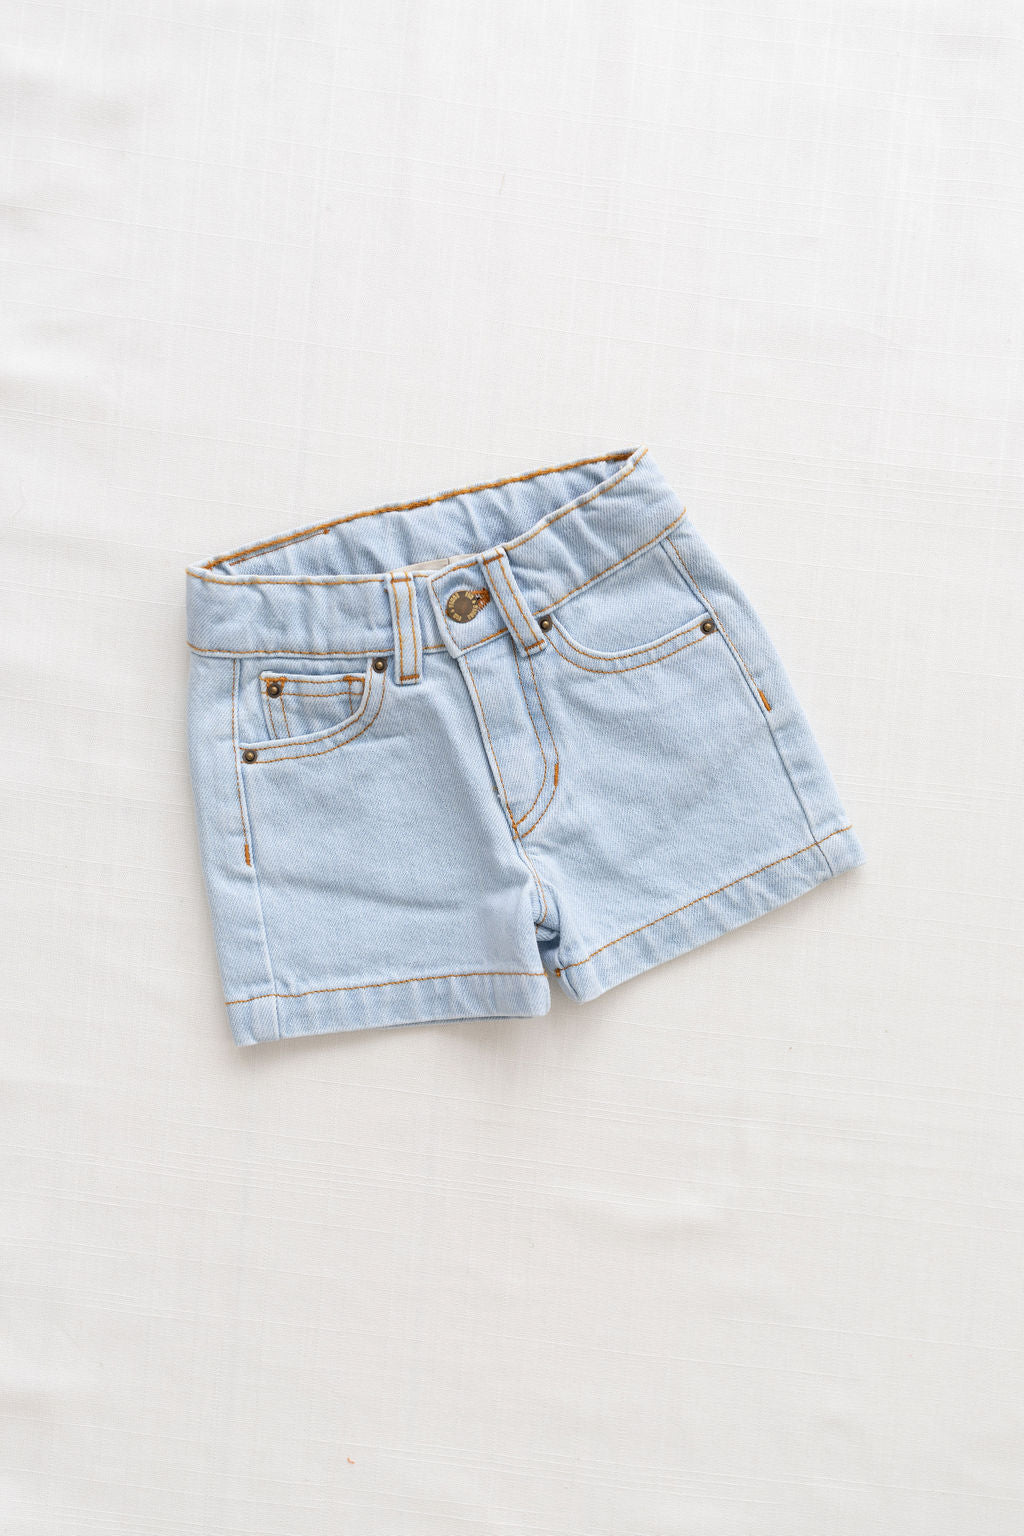 Fin & Vince Vintage Denim Shorts with Embroidery